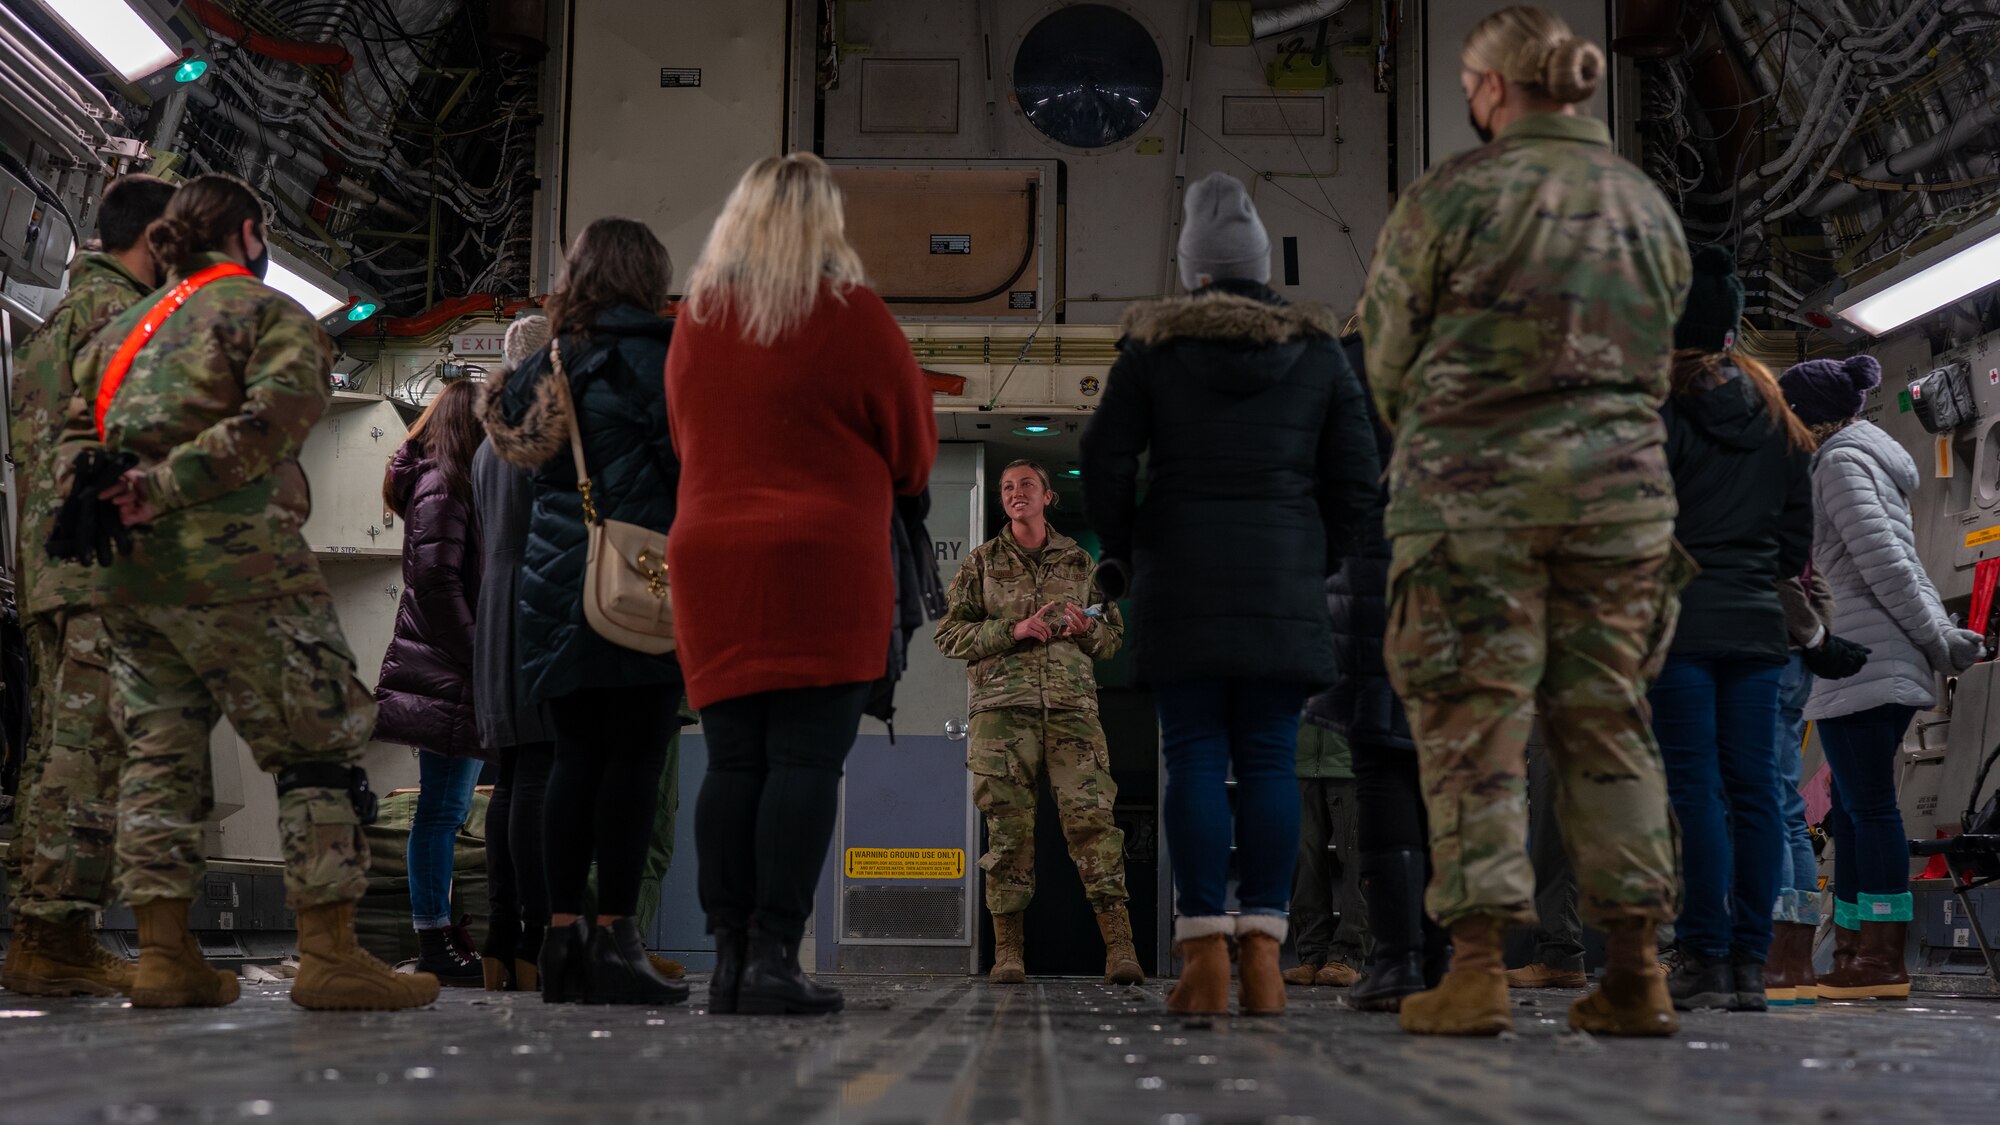 U.S. Air Force Staff Sgt. Morgan Hansen, 703rd Aircraft Maintenance Squadron C-17 Globemaster III aircraft flying crew chief, briefs 3rd Wing key spouses about a C-17 during an immersion at Joint Base Elmendorf-Richardson, Alaska, Oct. 14, 2021. The immersion gave key spouses an opportunity to see the 3rd Wing’s operations, educating and recognizing them as key components of the wing’s mission. (U.S. Air Force photo by Senior Airman Justin Wynn)